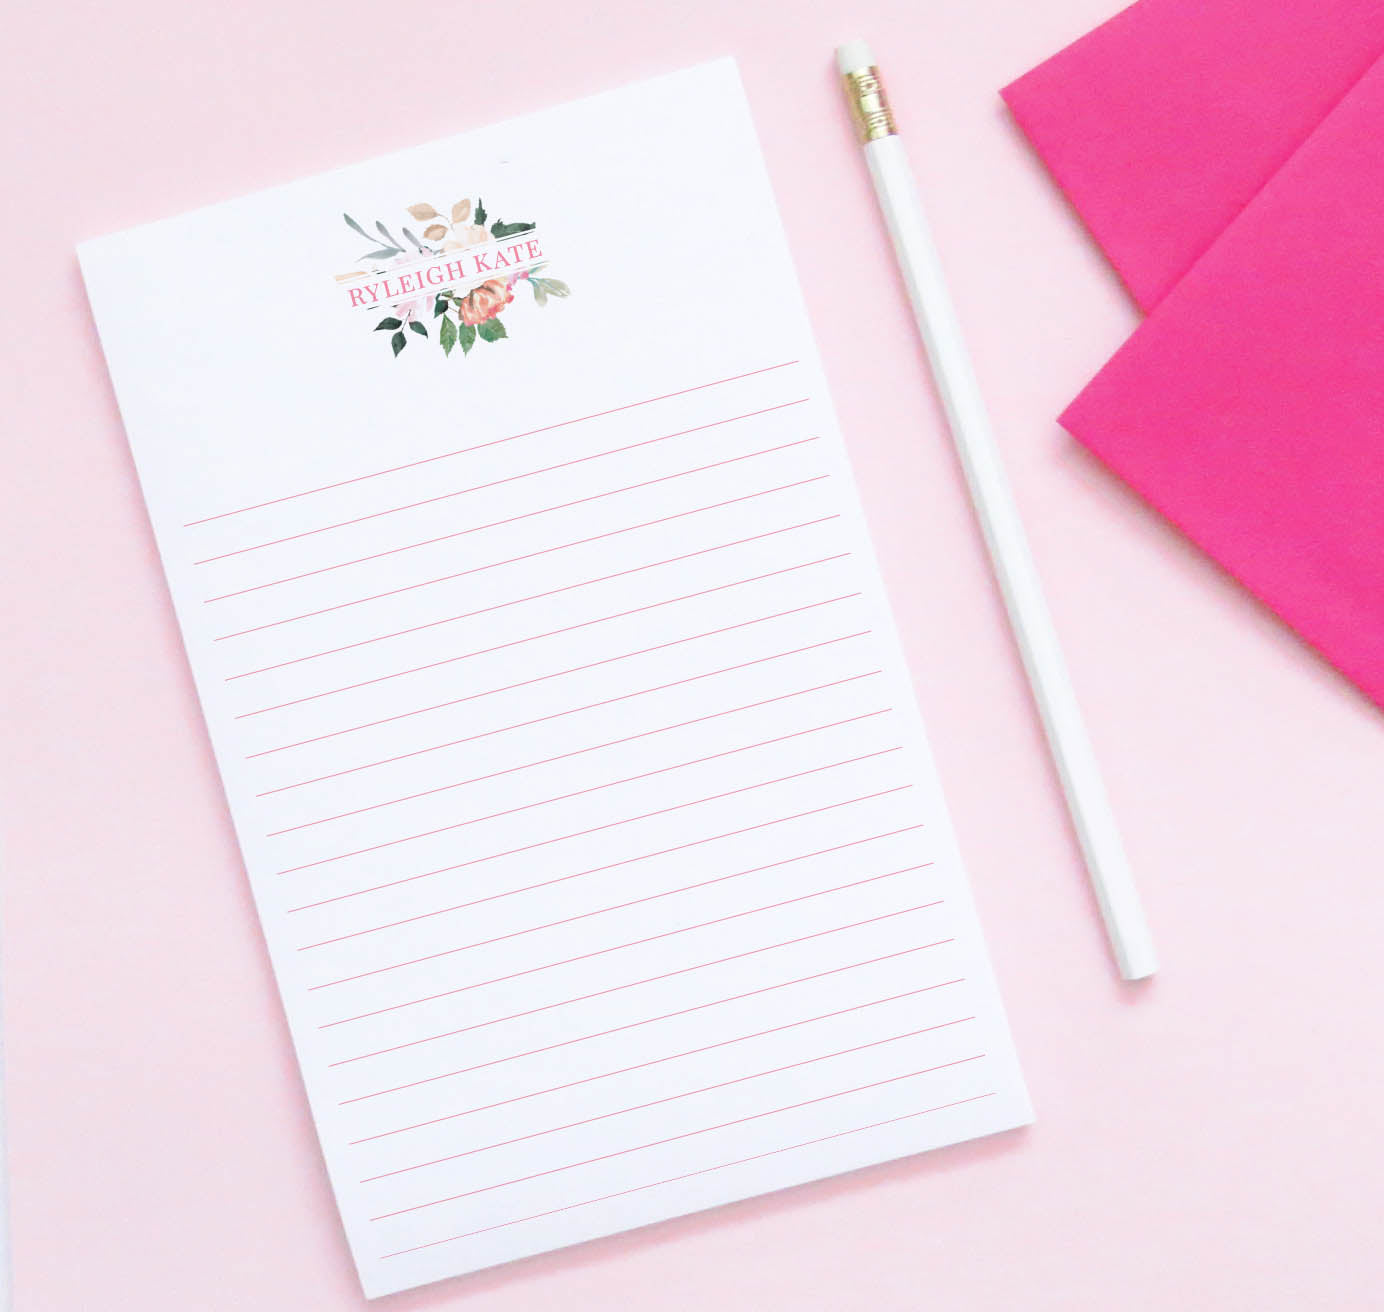 Personalized Stationery Sets for Letter Writing